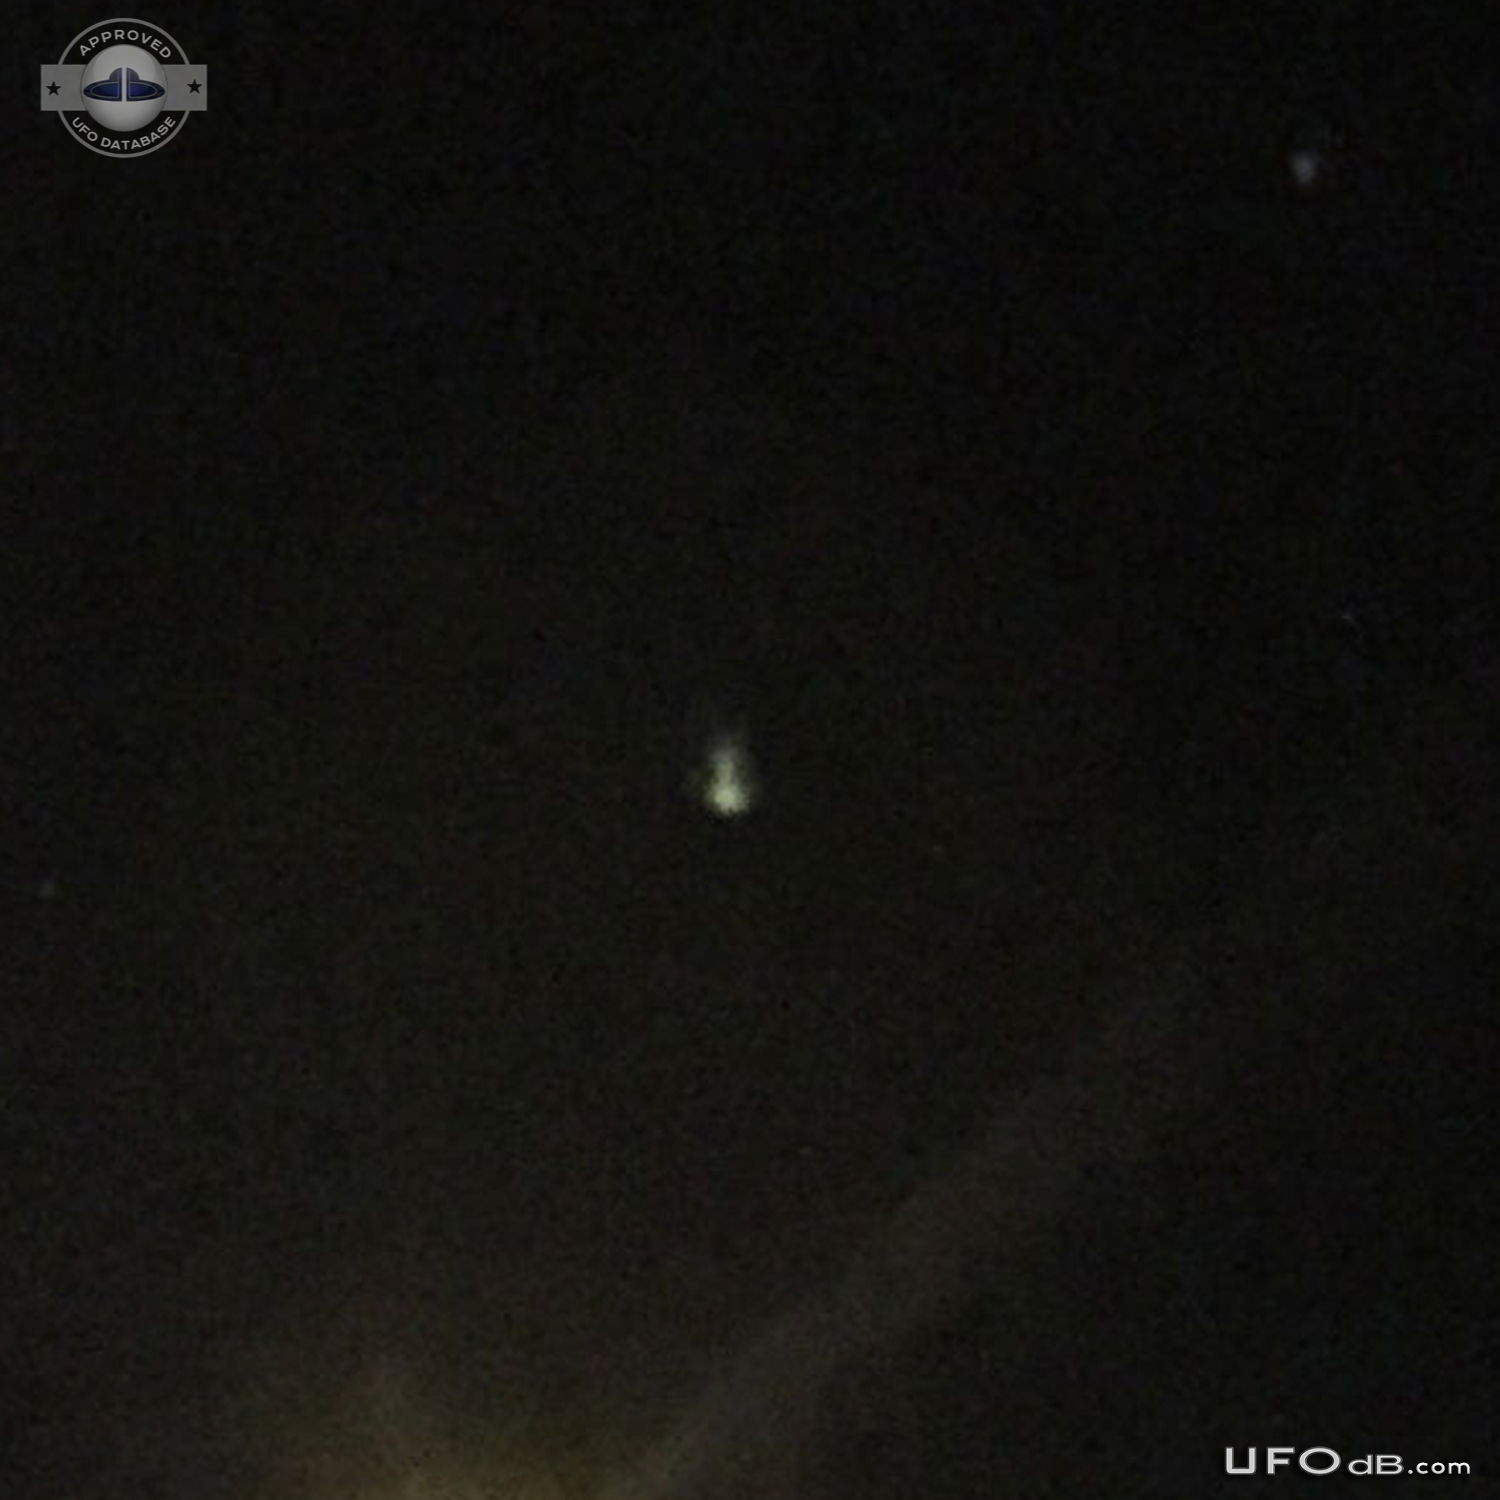 Two very very bright lights UFOs in the sky of Lacey, Washington 2015 UFO Picture #628-3